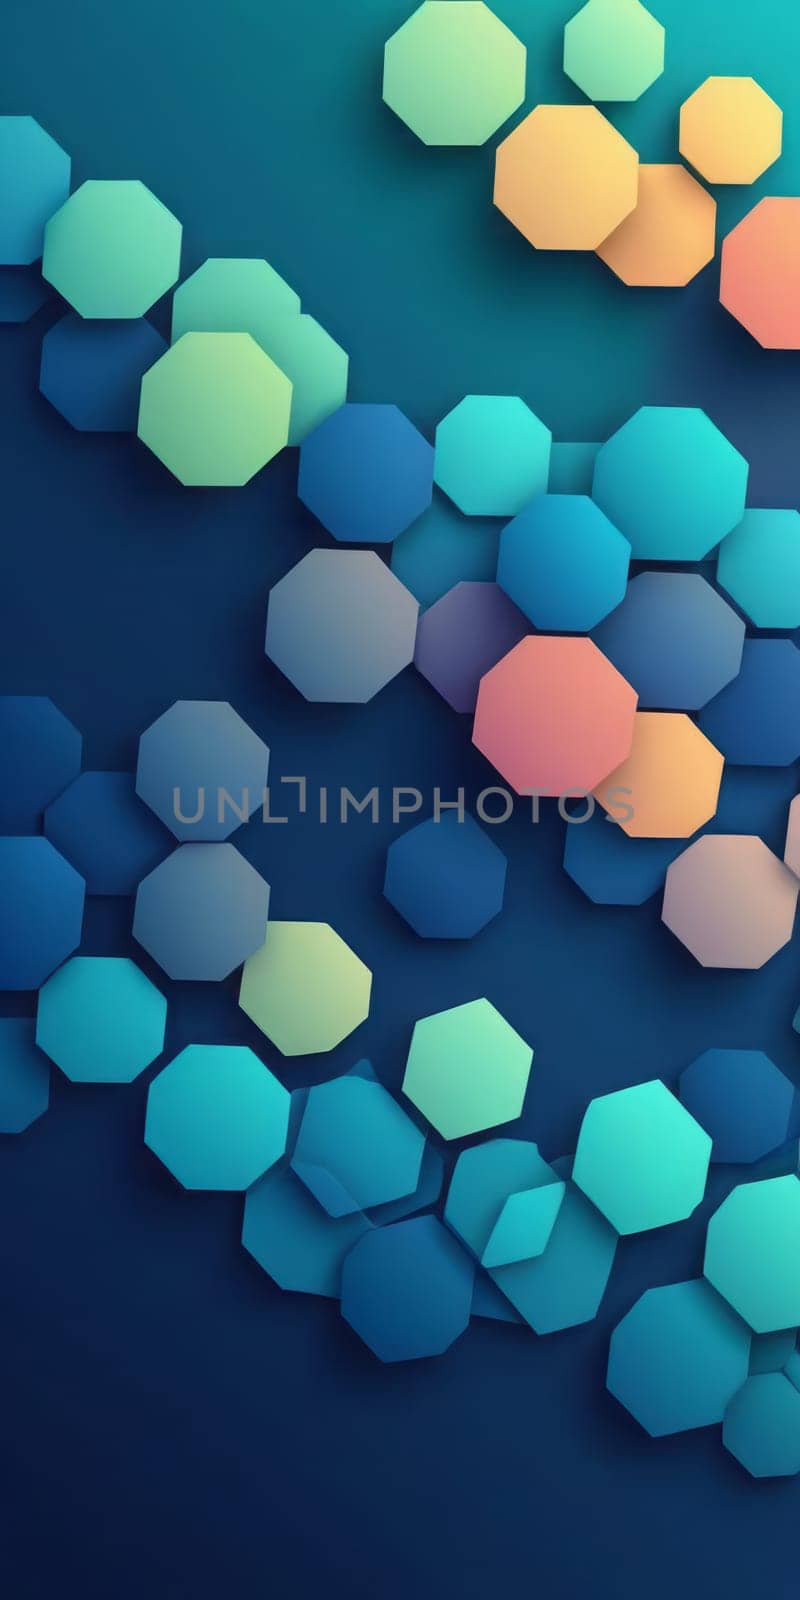 Octagonal Shapes in Navy and Cyan by nkotlyar